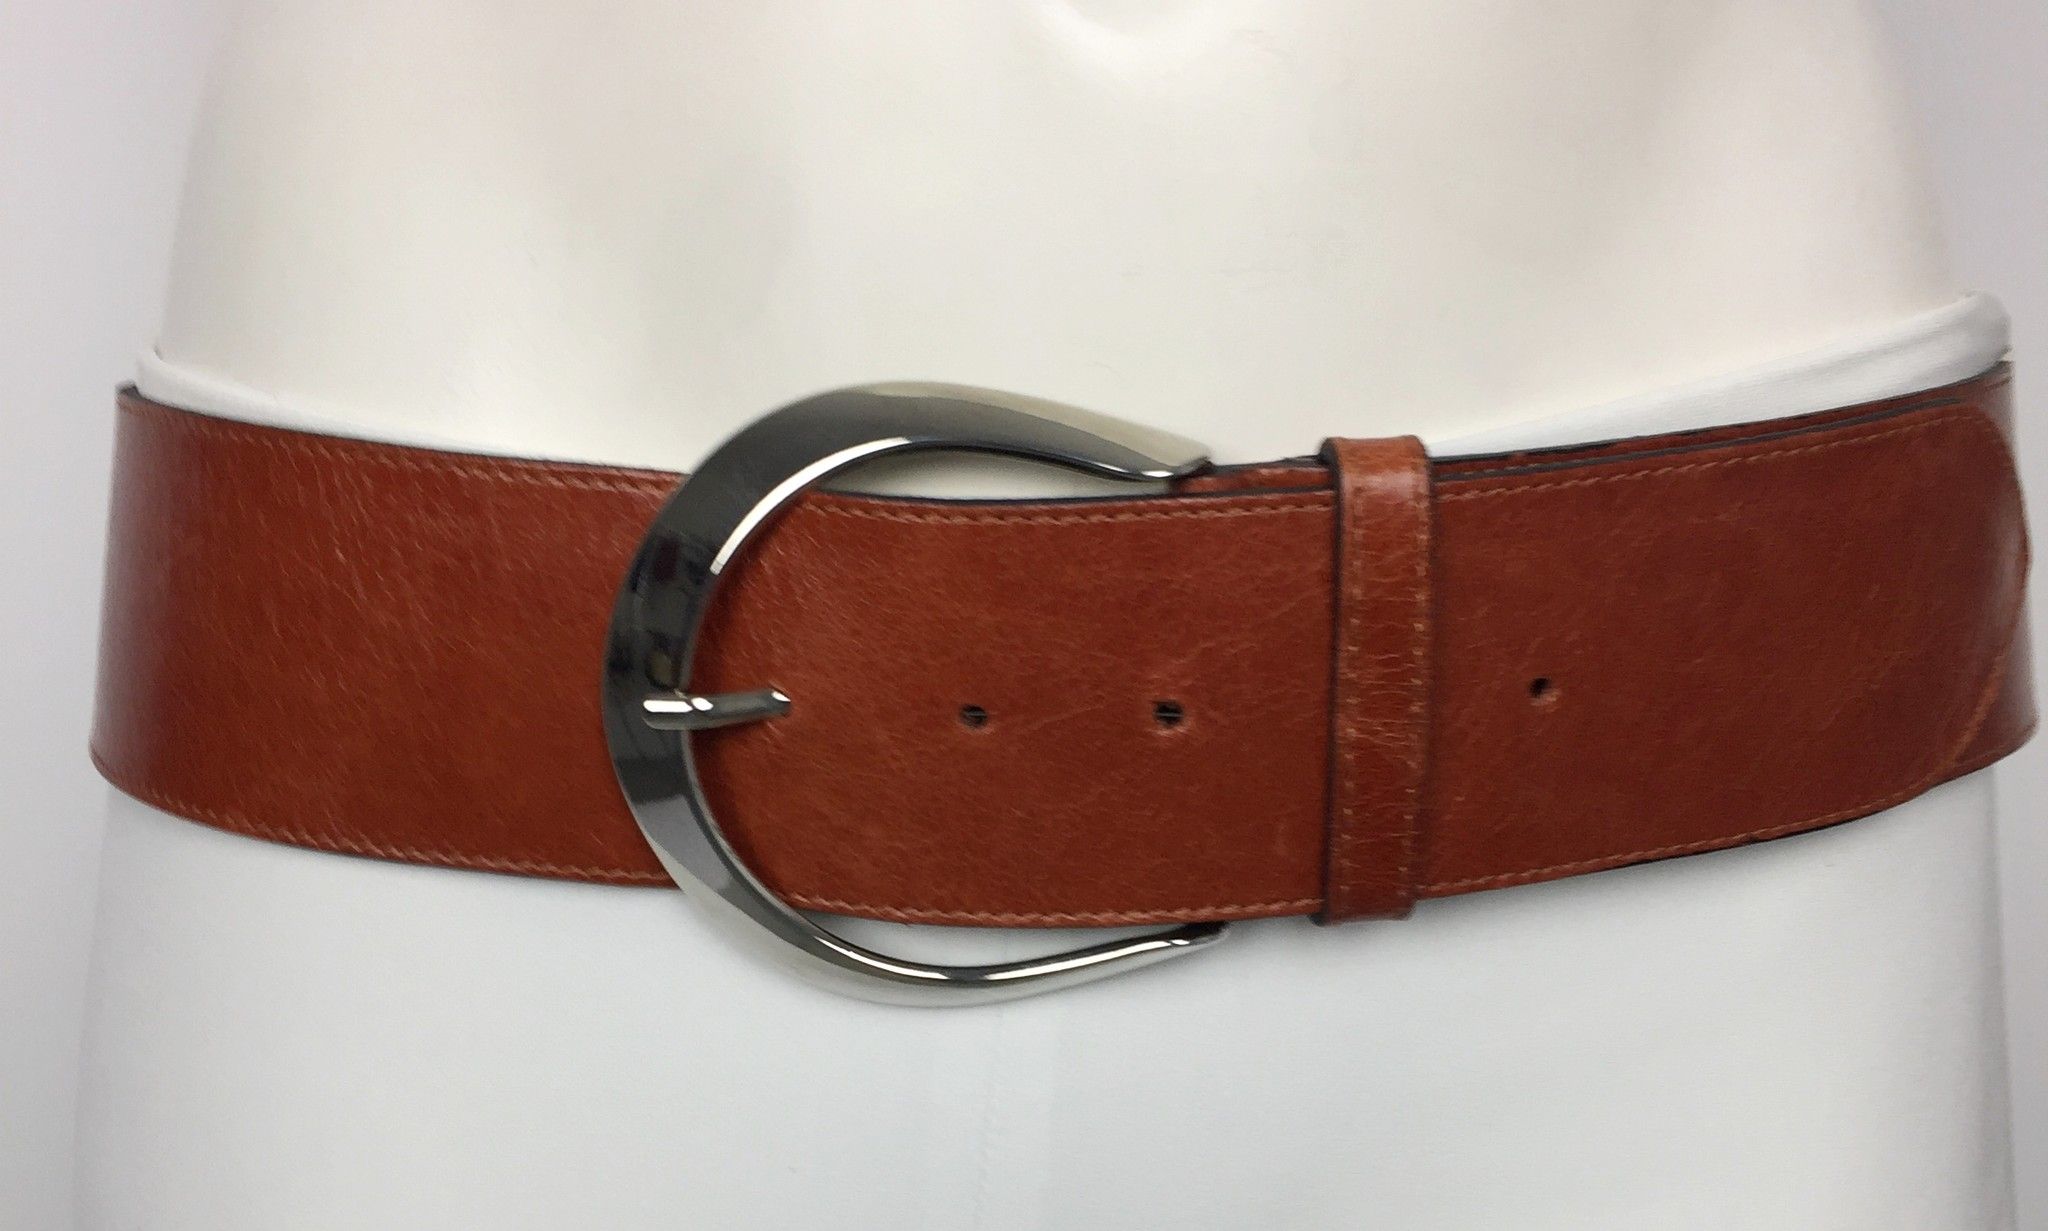 LadyBug Real Leather Belt with Round Steel Buckle Cod.25784